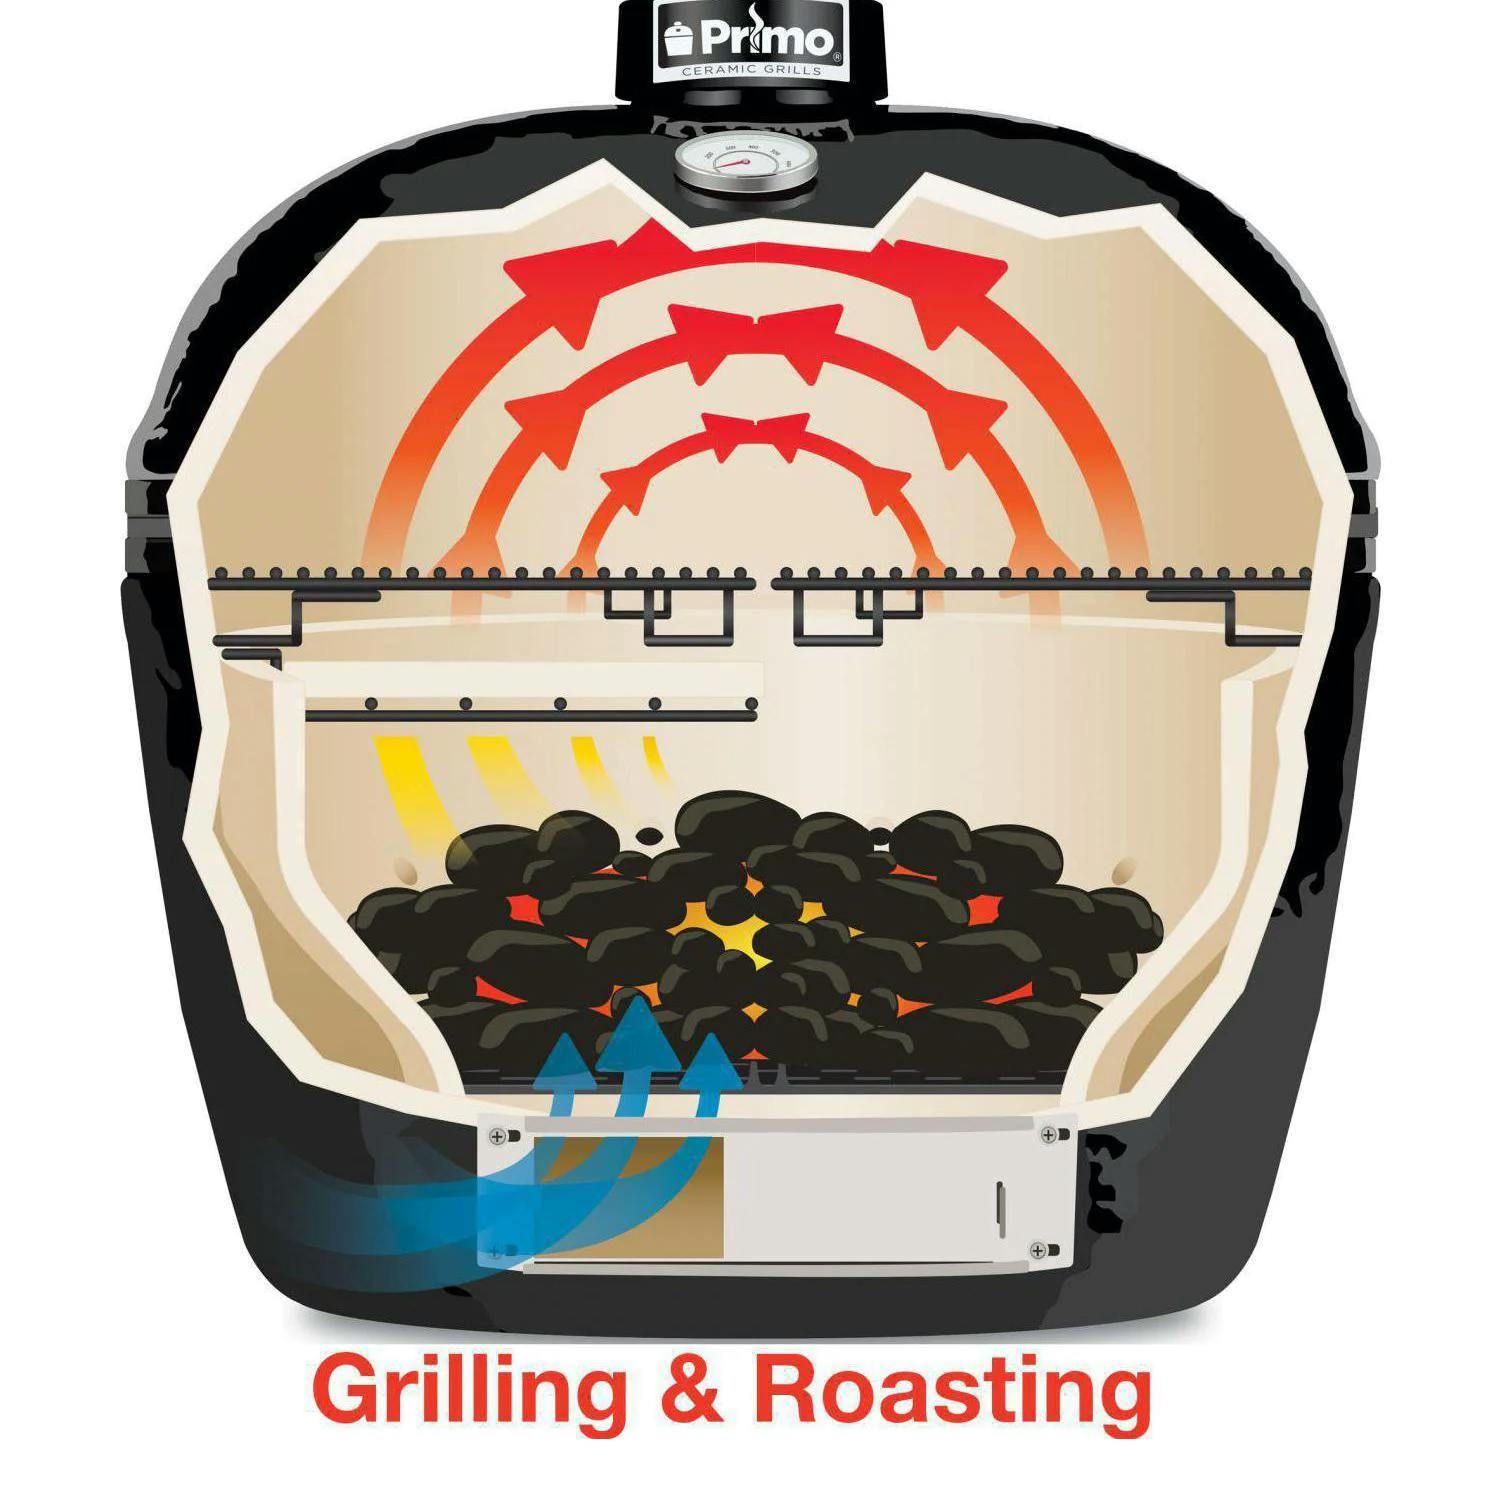 Primo Oval 300 Ceramic Kamado Grill with Stainless Steel Grates